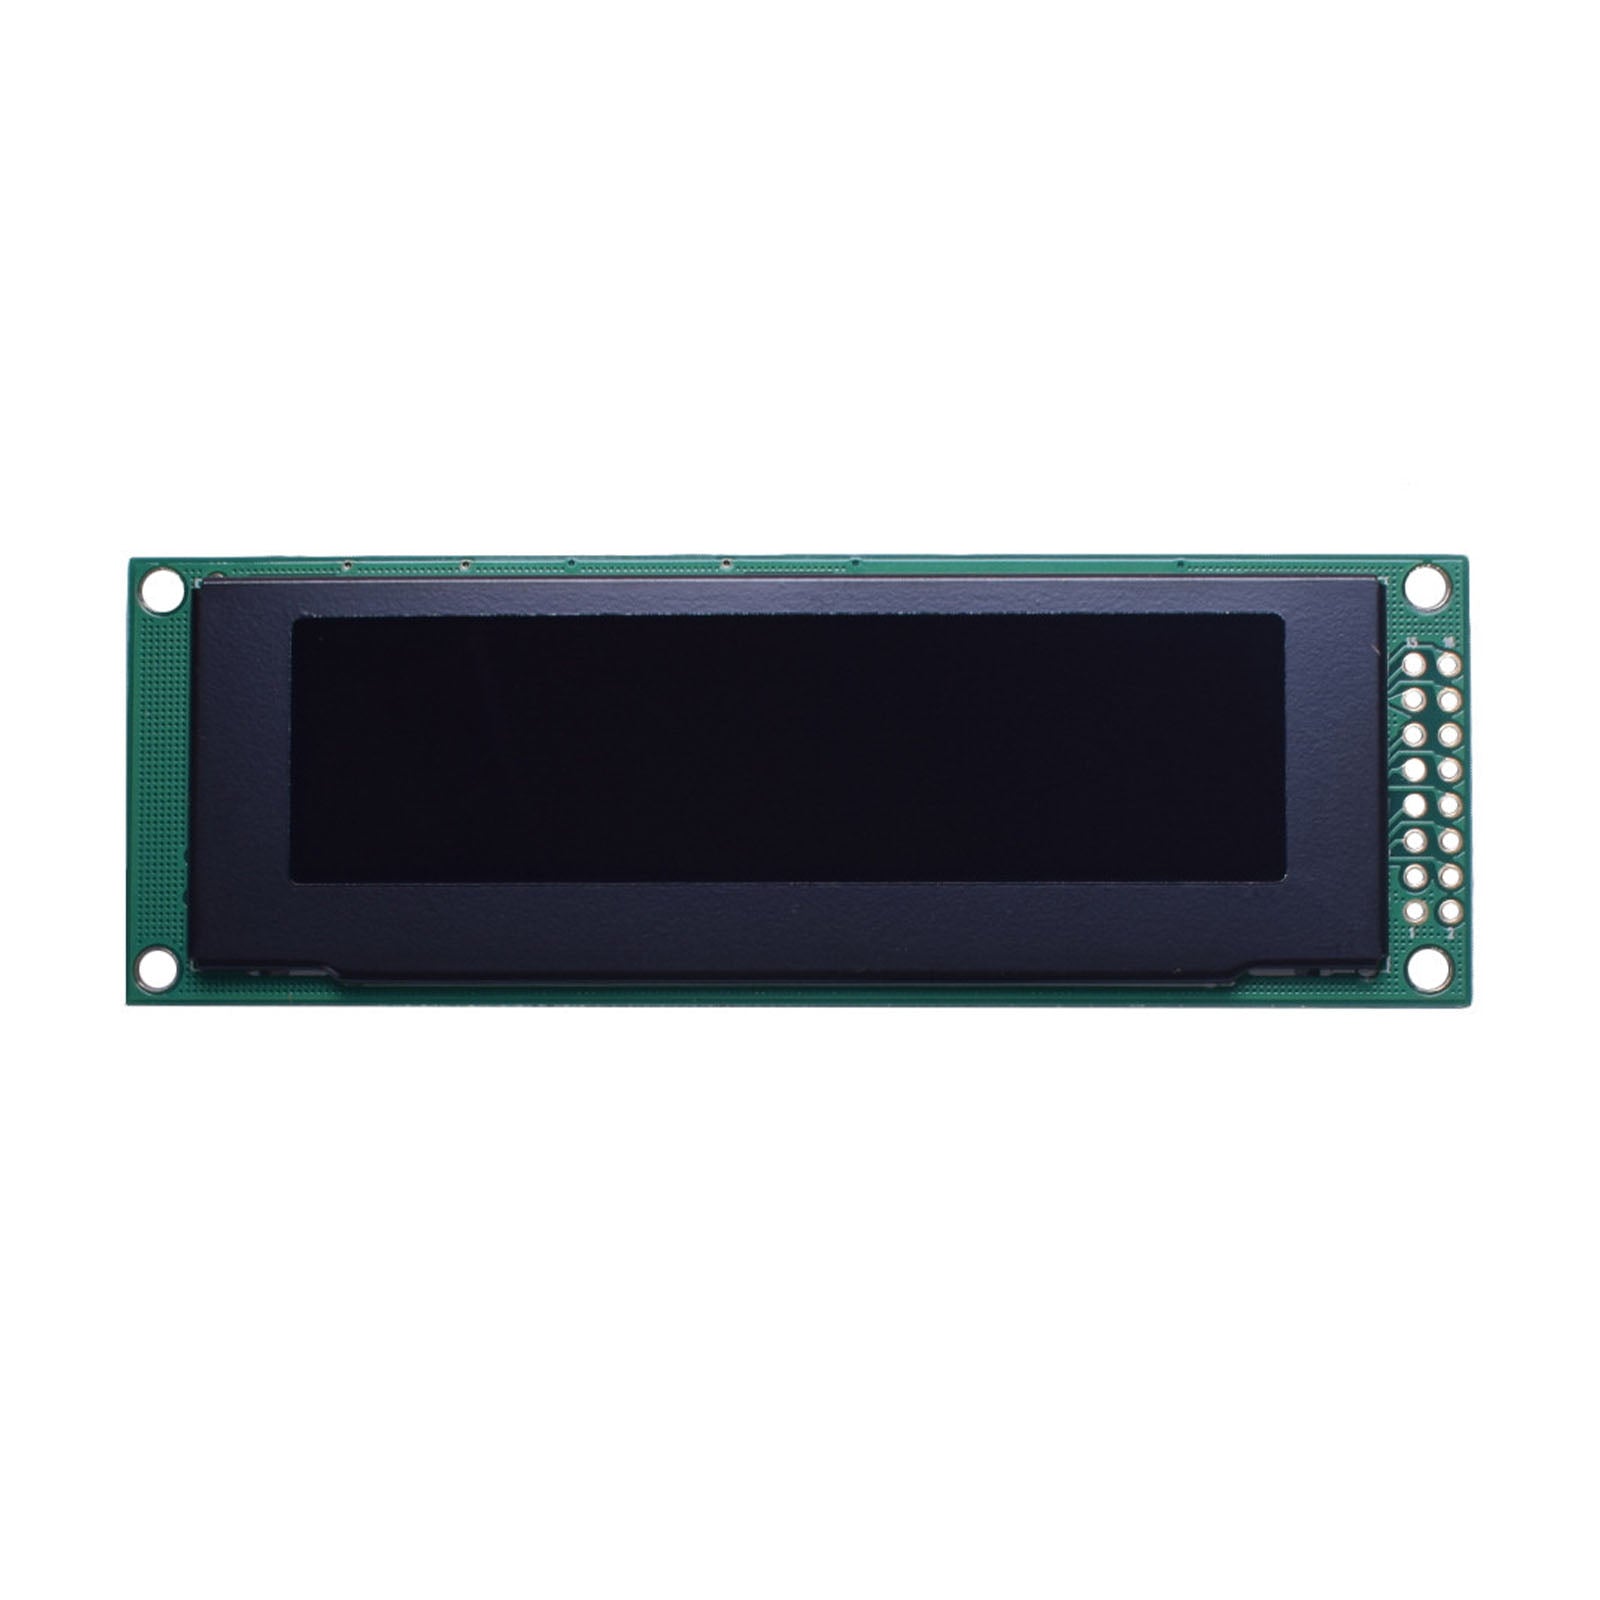 2.8 inch Monochrome OLED Graphic Display Module with 256x64 resolution, utilizing MCU and SPI interfaces